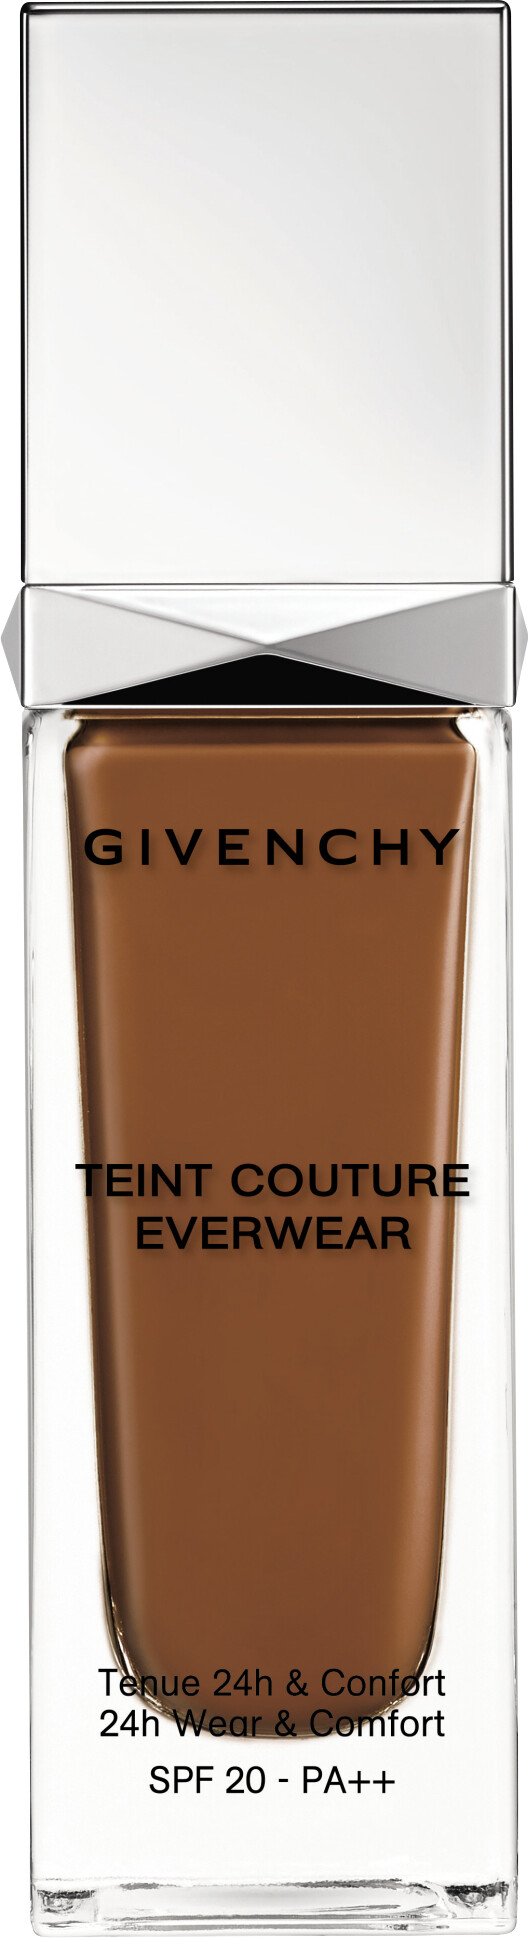 GIVENCHY Teint Couture Everwear 24h Wear & Comfort Foundation SPF20 30ml N470